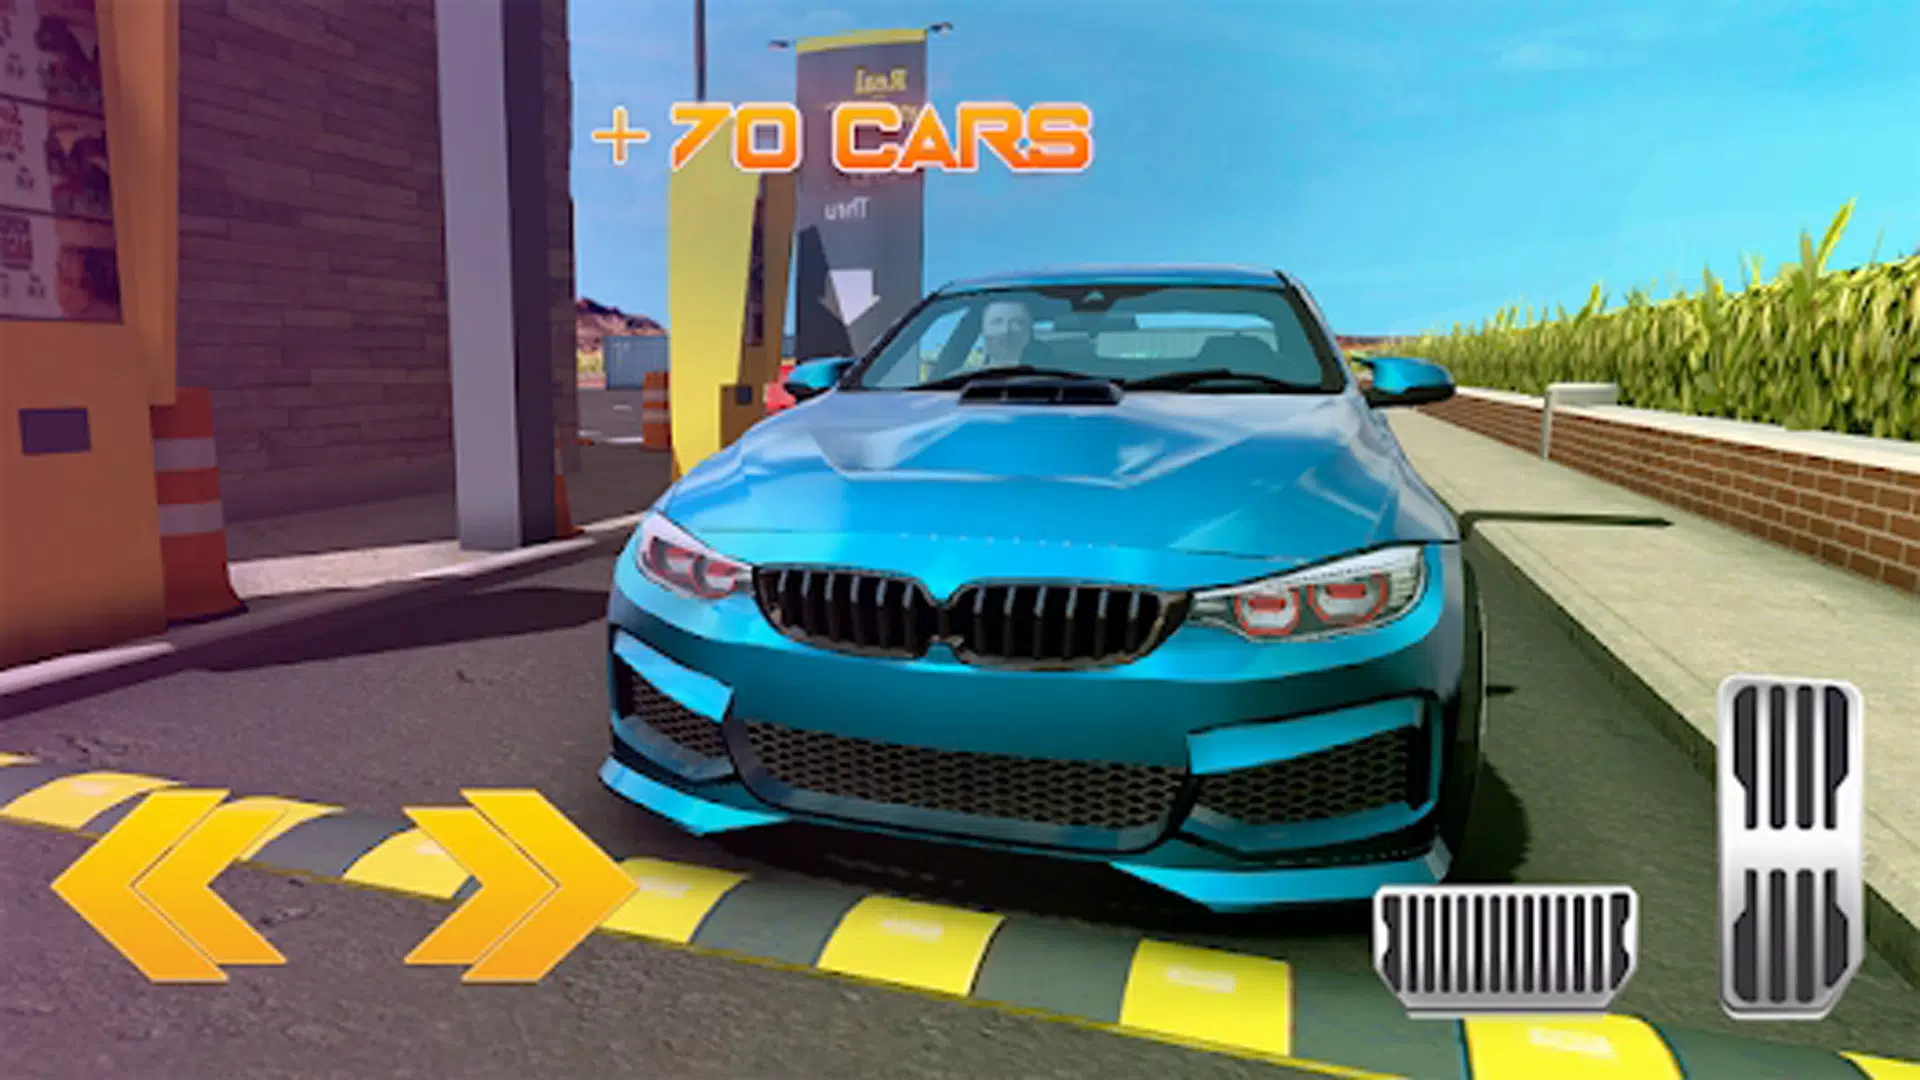 Car Parking Multiplayer APK for Android - Download